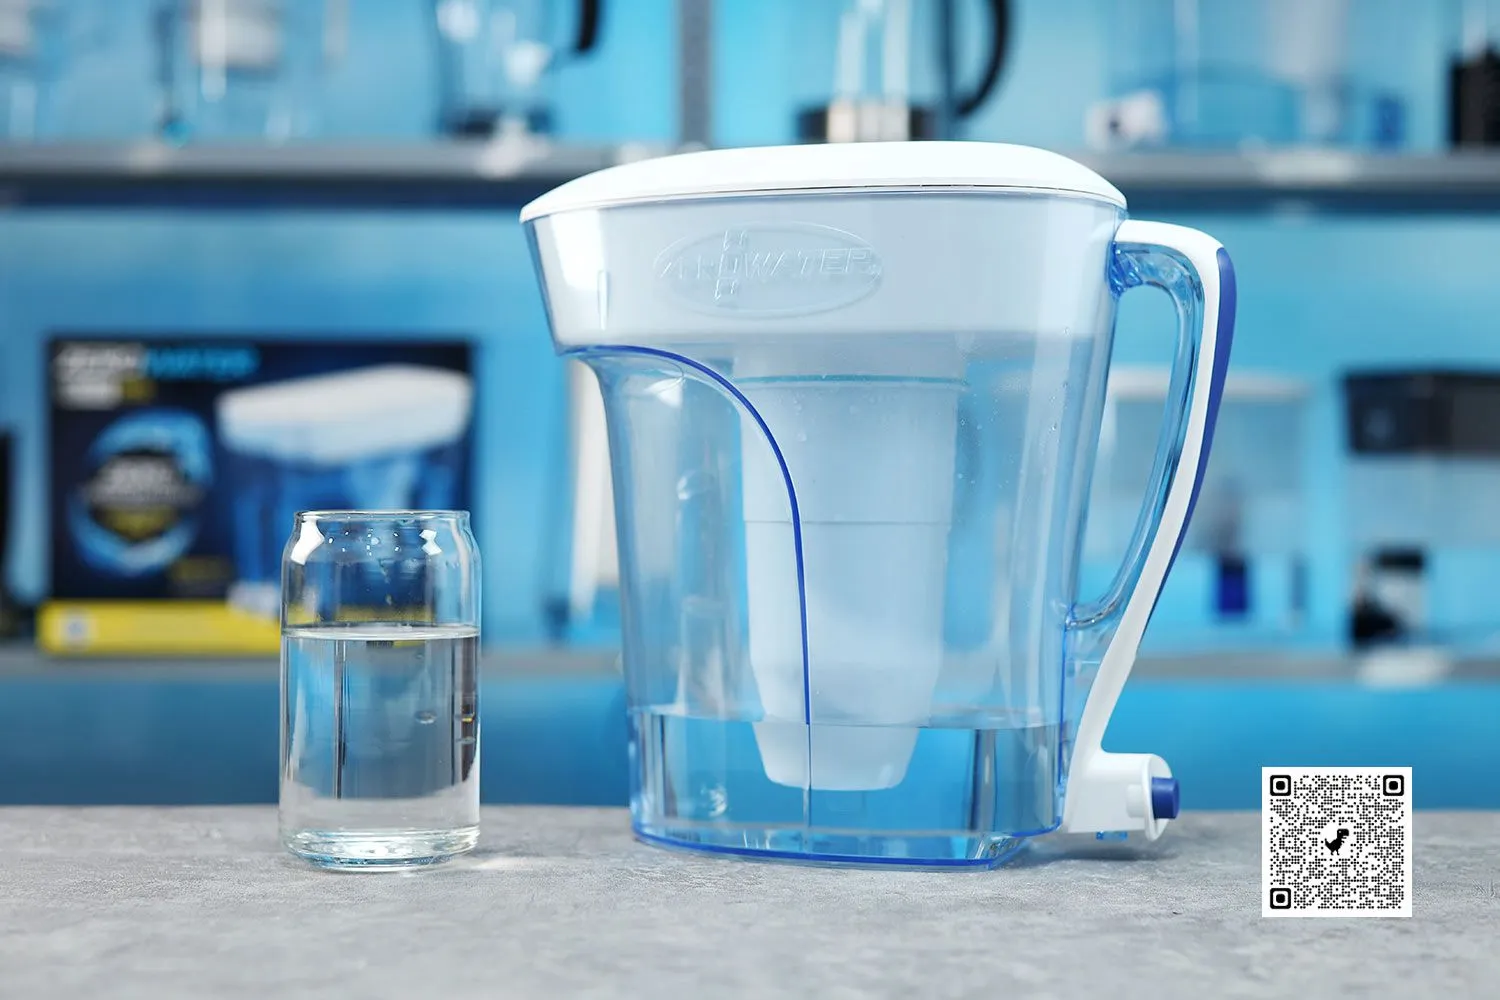 ZeroWater Filter Pitcher Review - Are The Claims Real? Compared to Pur  Filter 